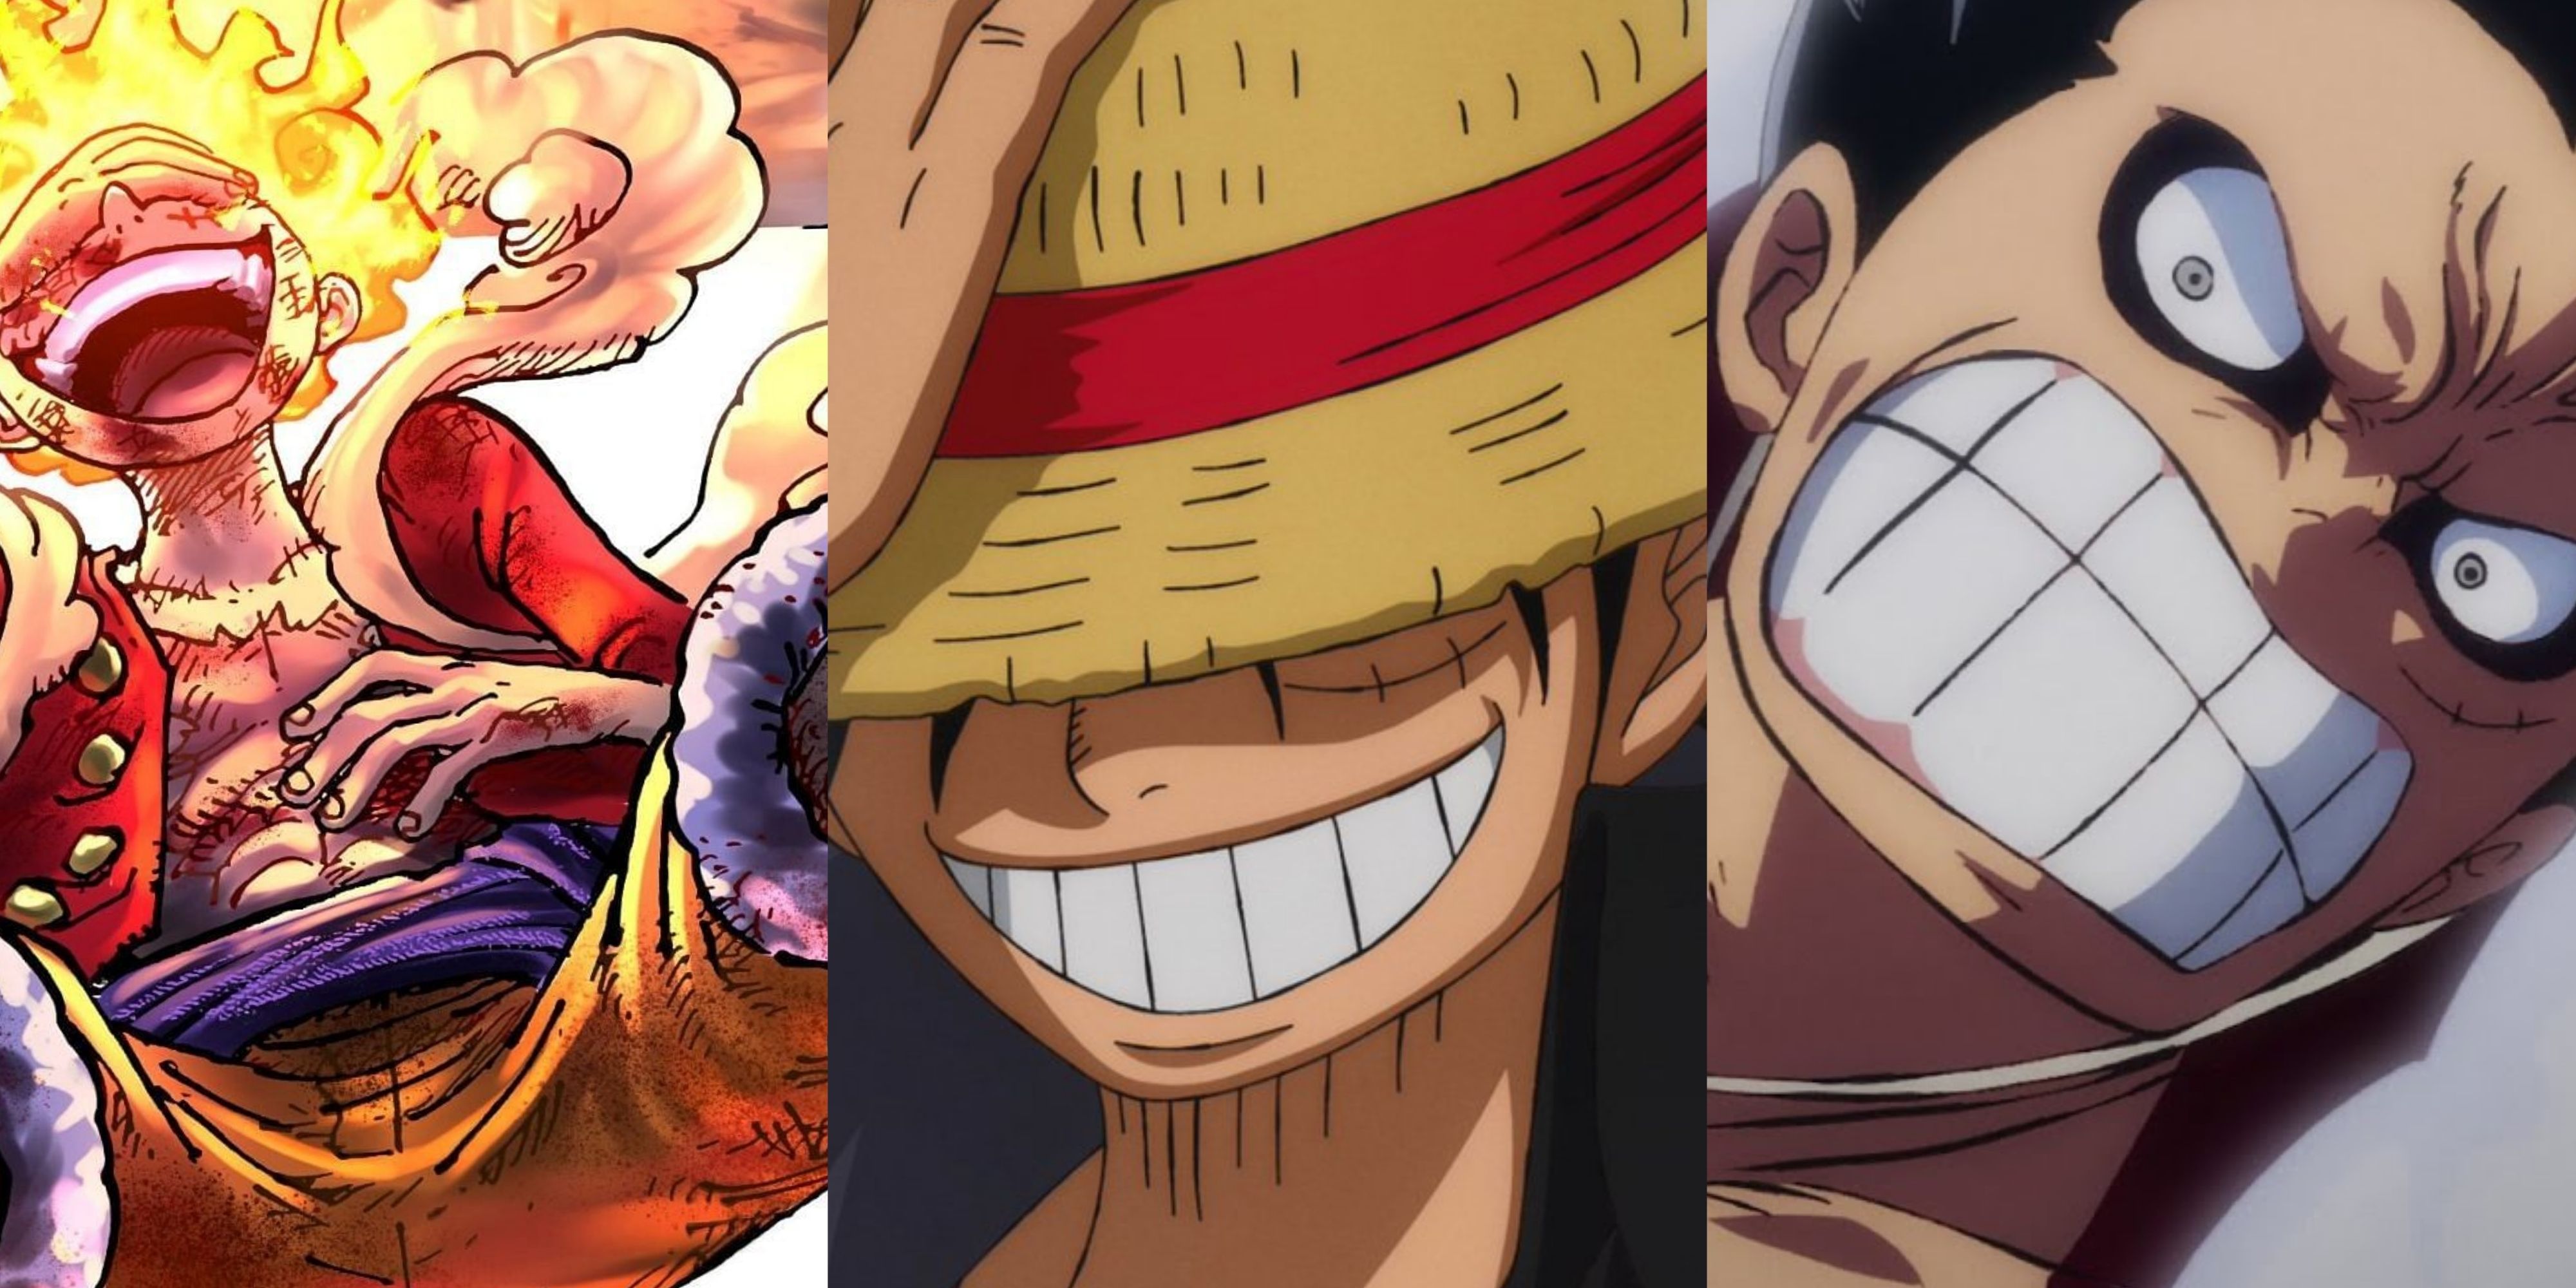 When Did Luffy Learn Haki in One Piece?